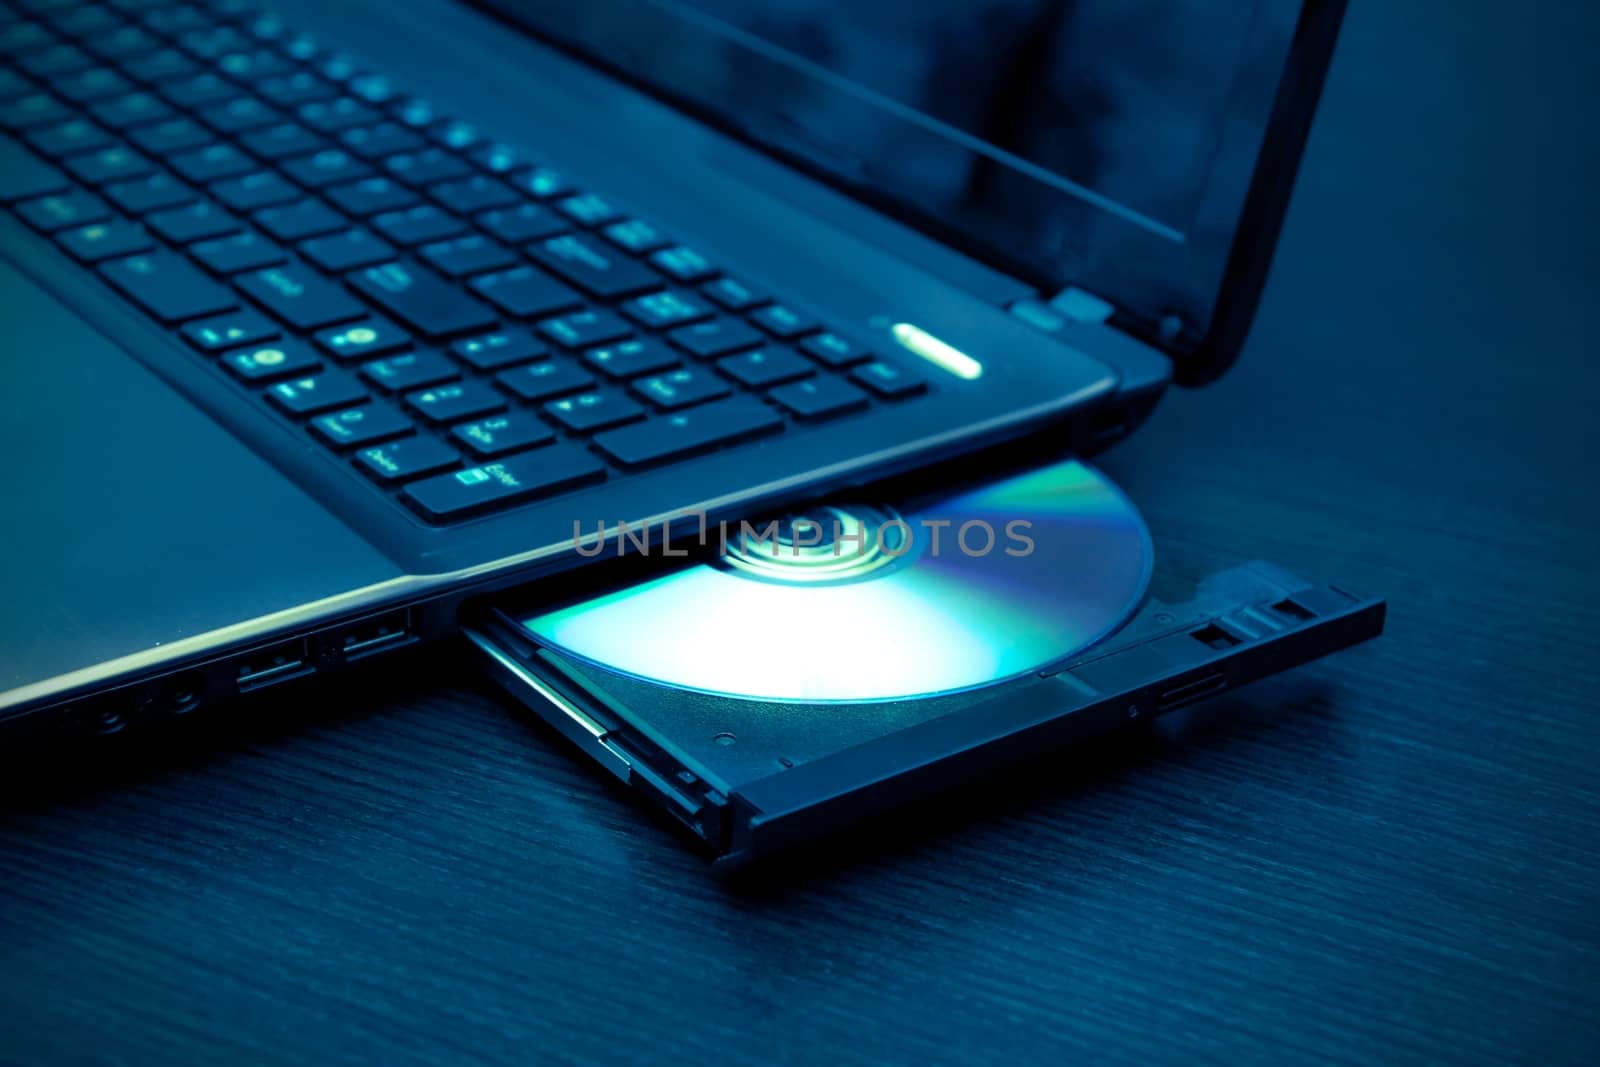 Laptop with open CD - DVD drive. Abstract light composition by simpson33